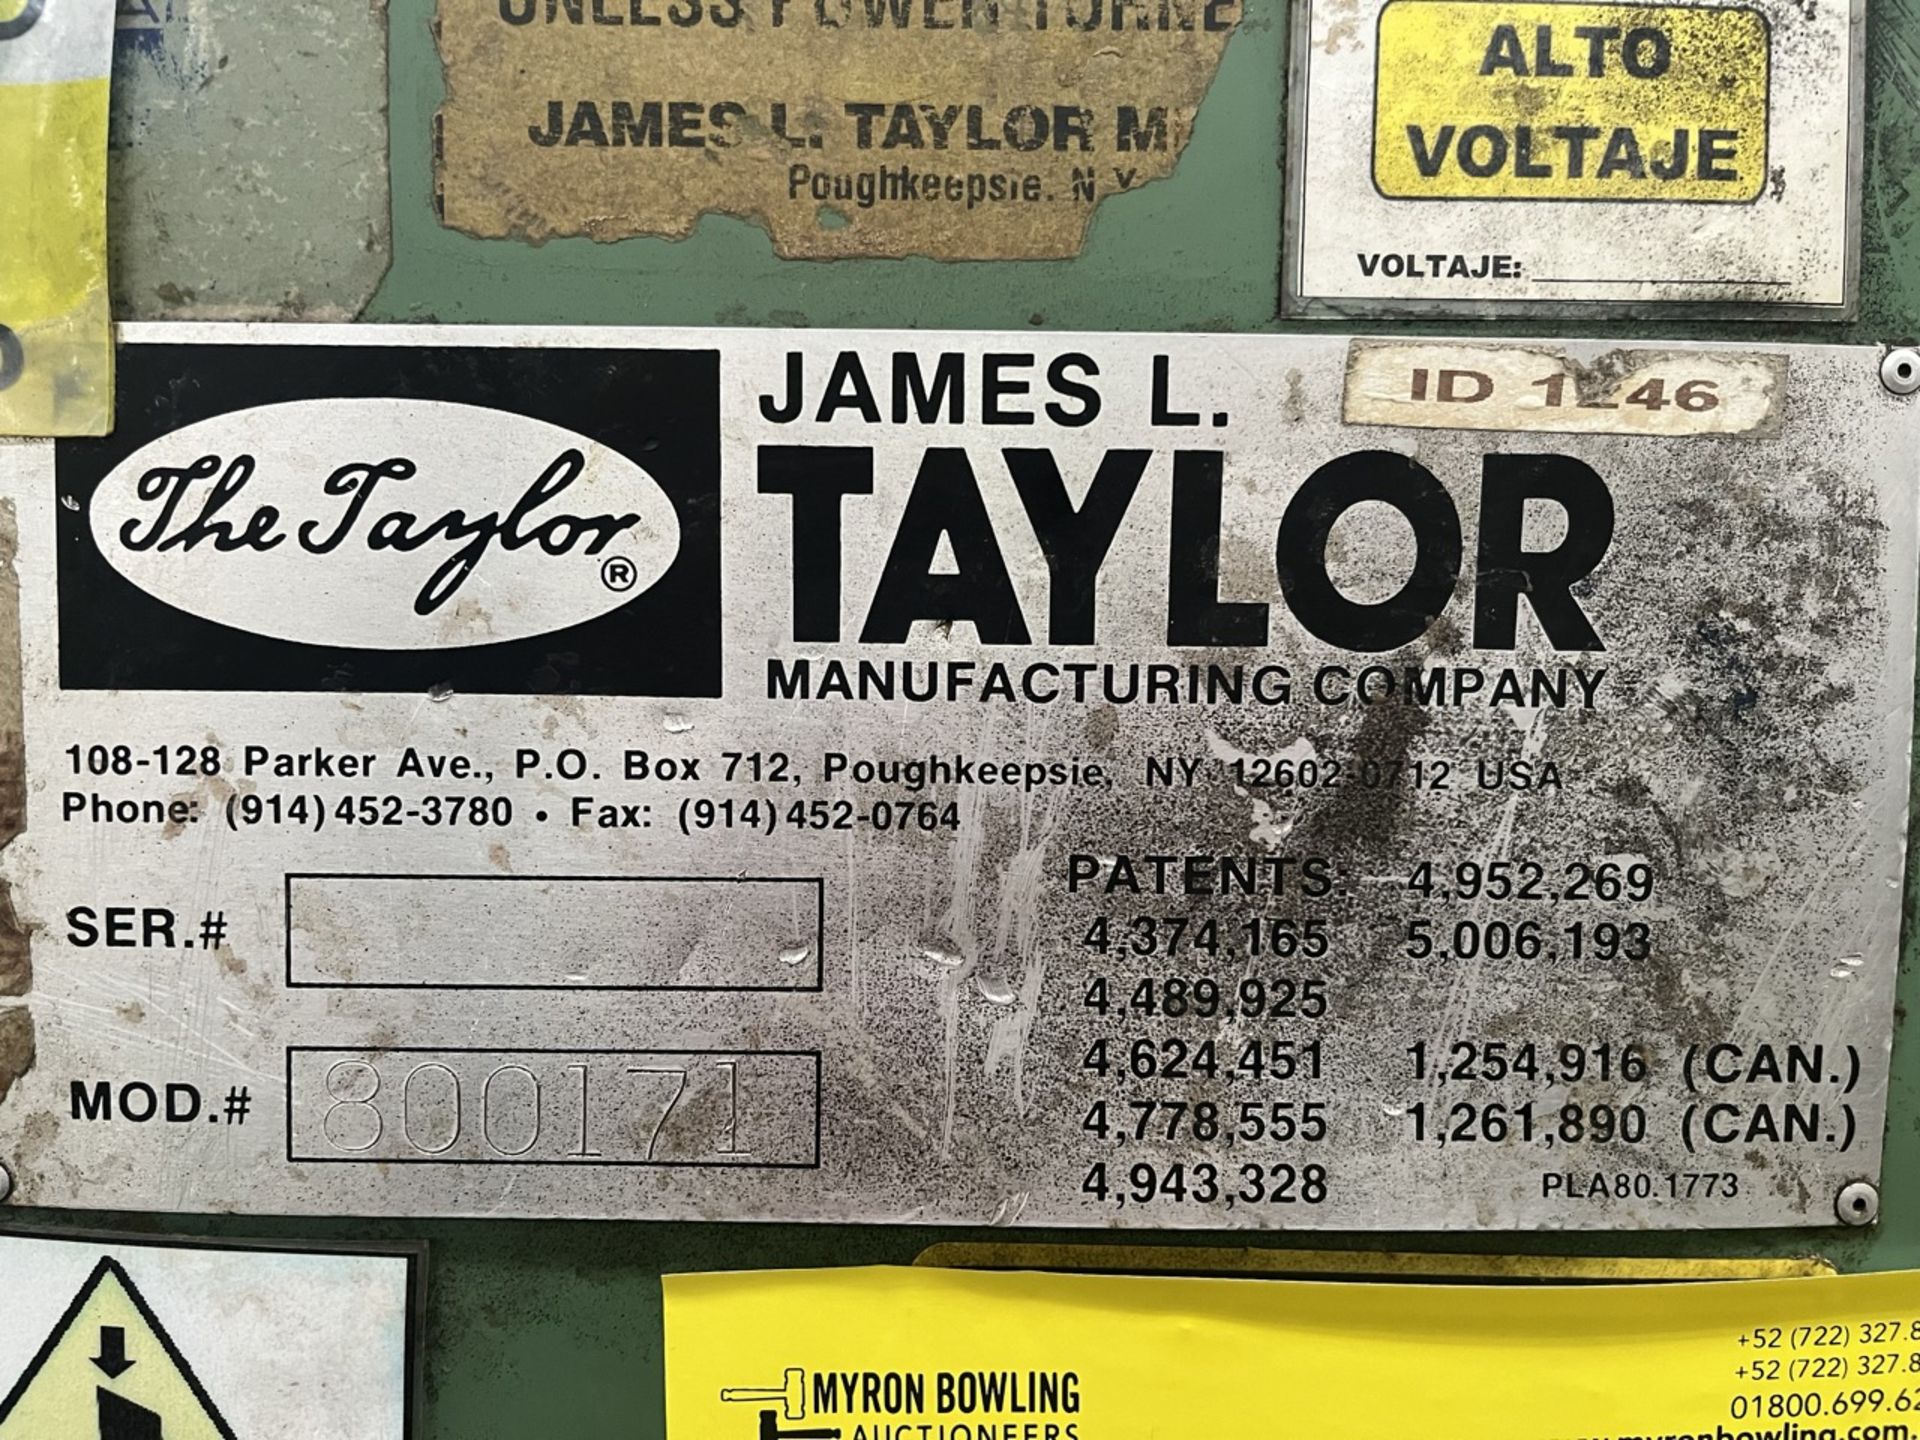 Taylor Octopus clamp holder and molder, Model 800169, Serial No. W493, Includes band to place the g - Image 11 of 12